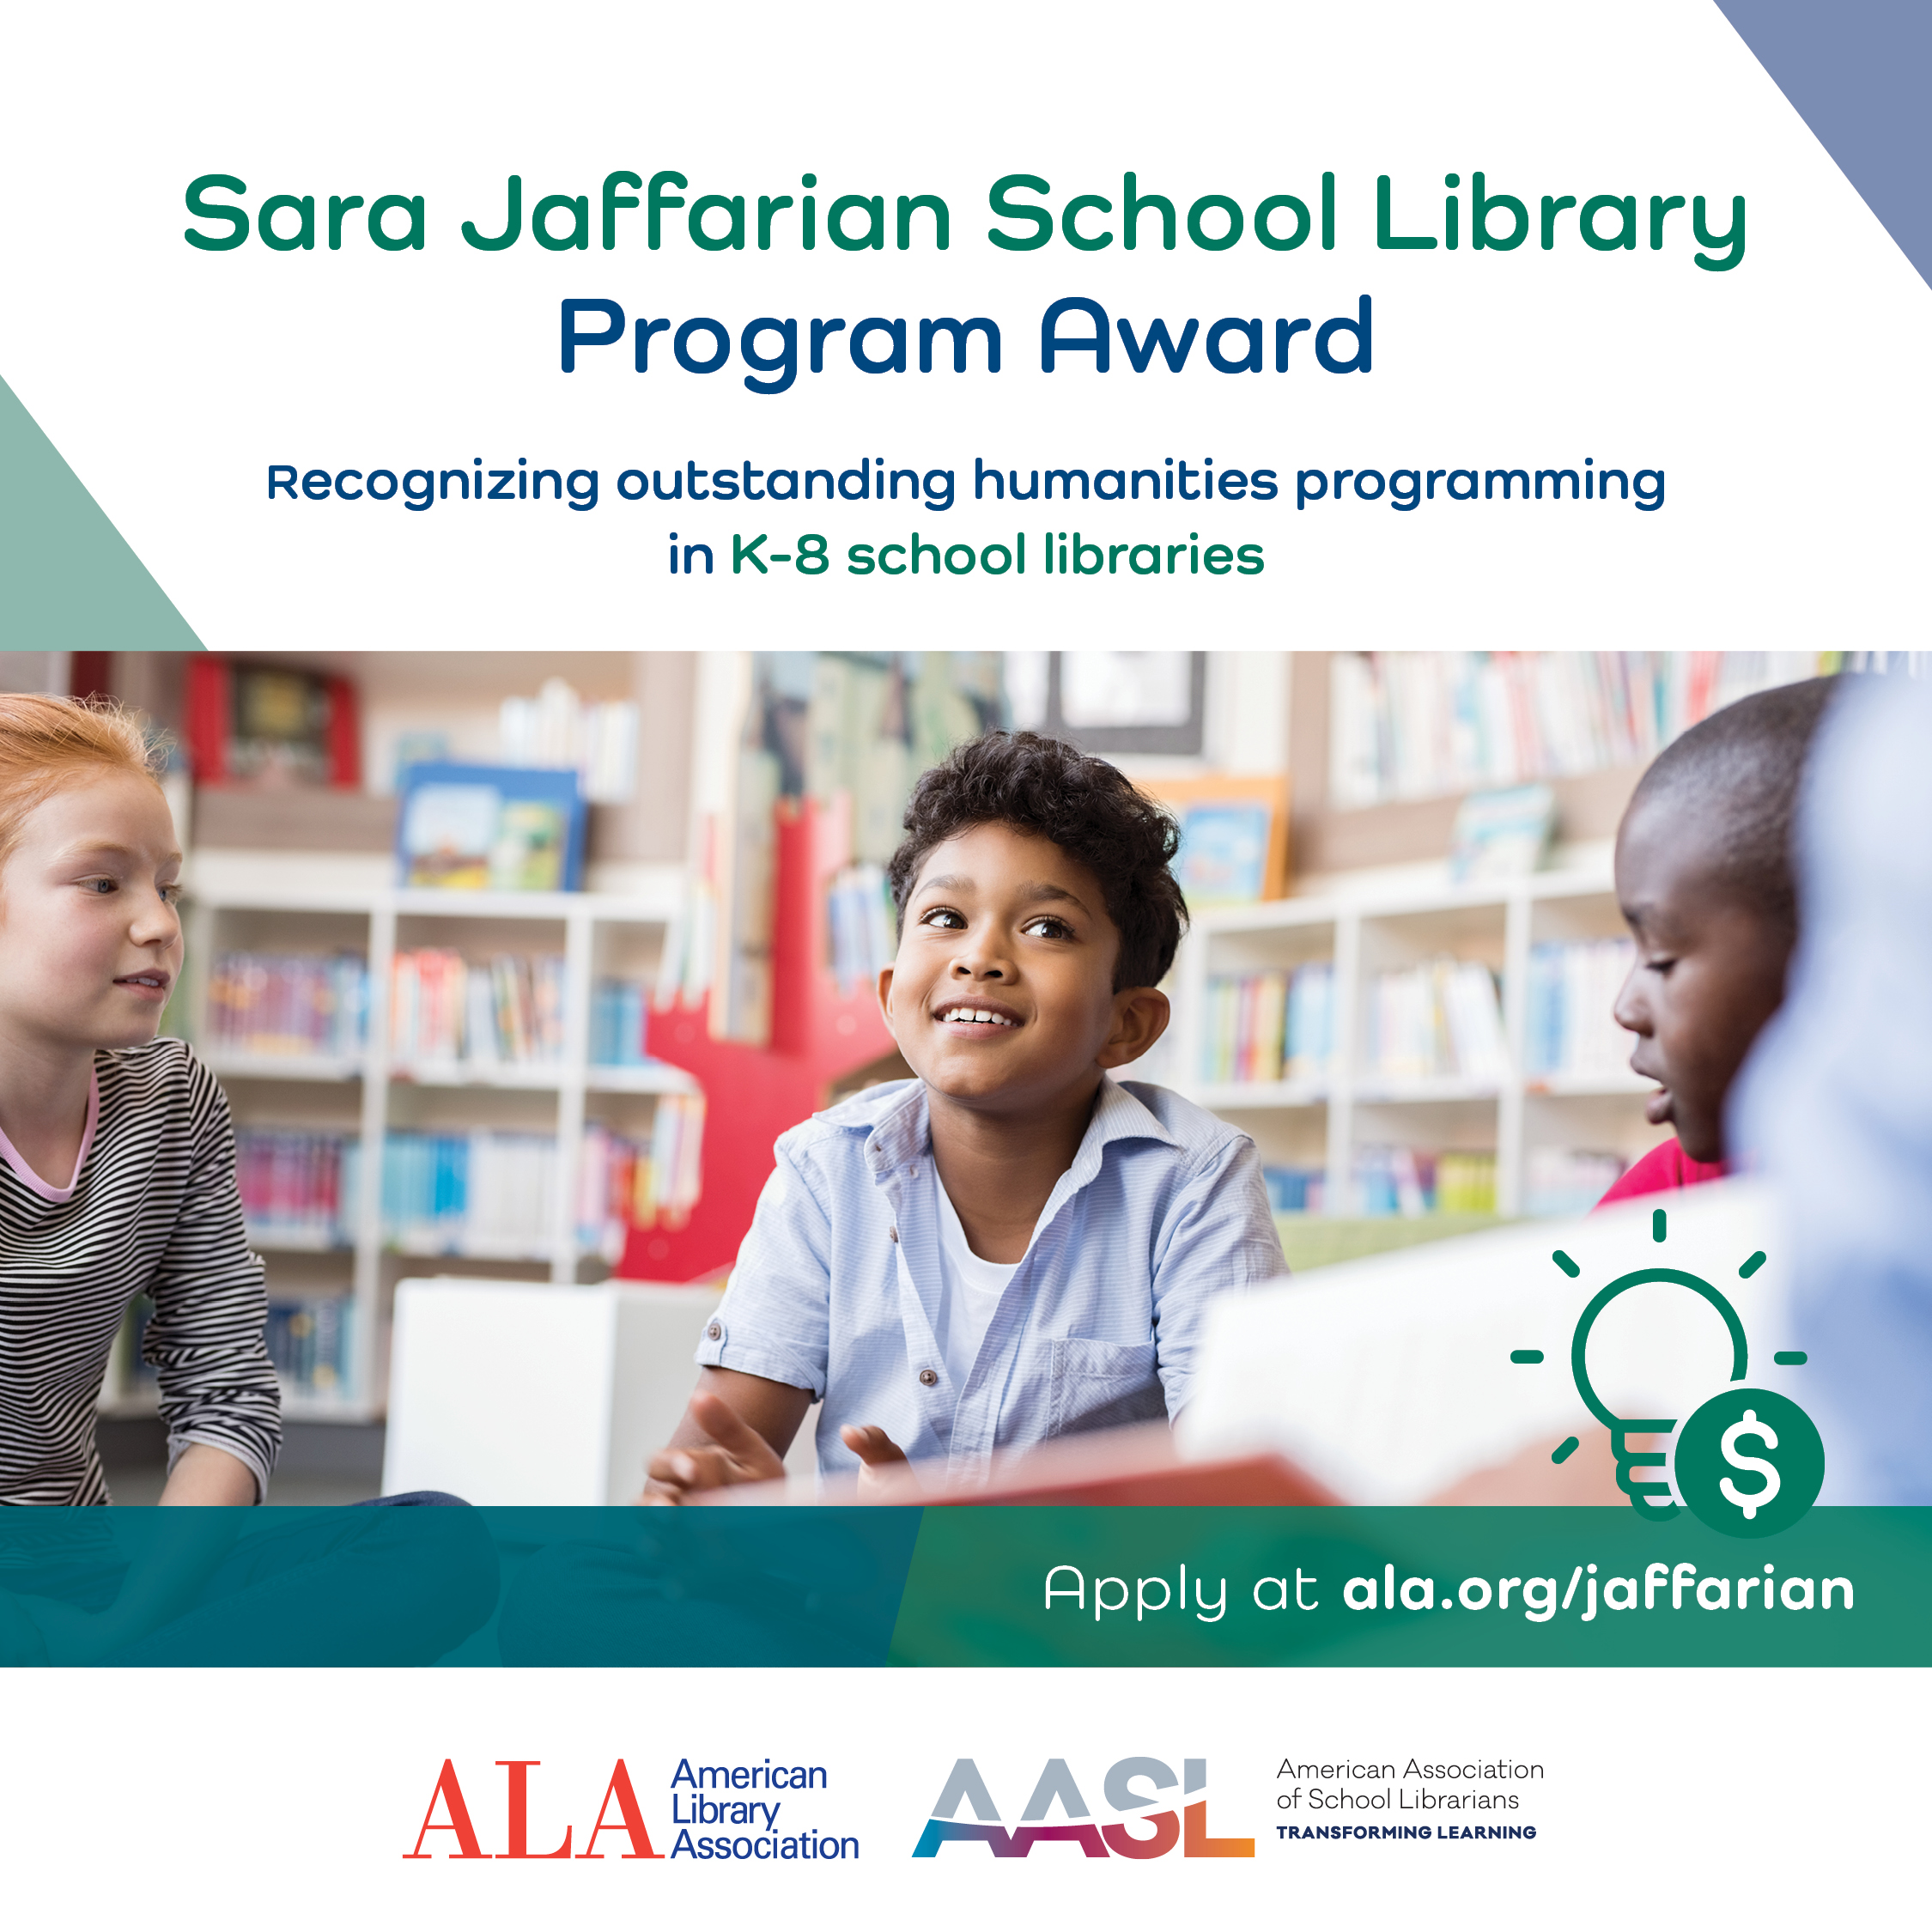 Photograph of three children sitting together. Text reads: Sara Jaffarian School Library Program Award. Recognizing outstanding humanities programming in K-8 school libraries. Apply at ala.org/jaffarian 